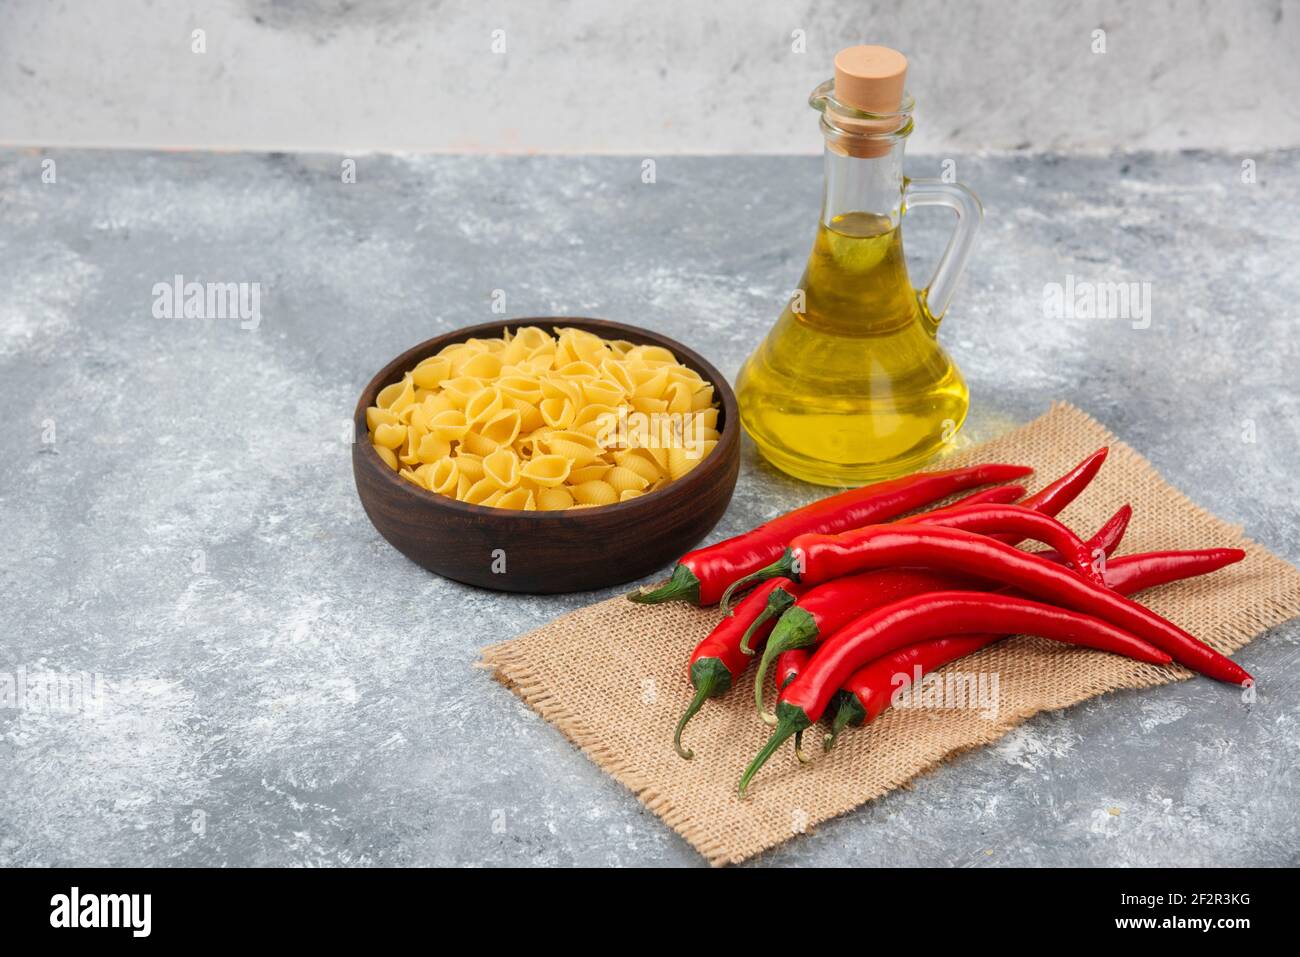 Wooden bowl of raw pasta with red chili peppers and oil on marble background Stock Photo